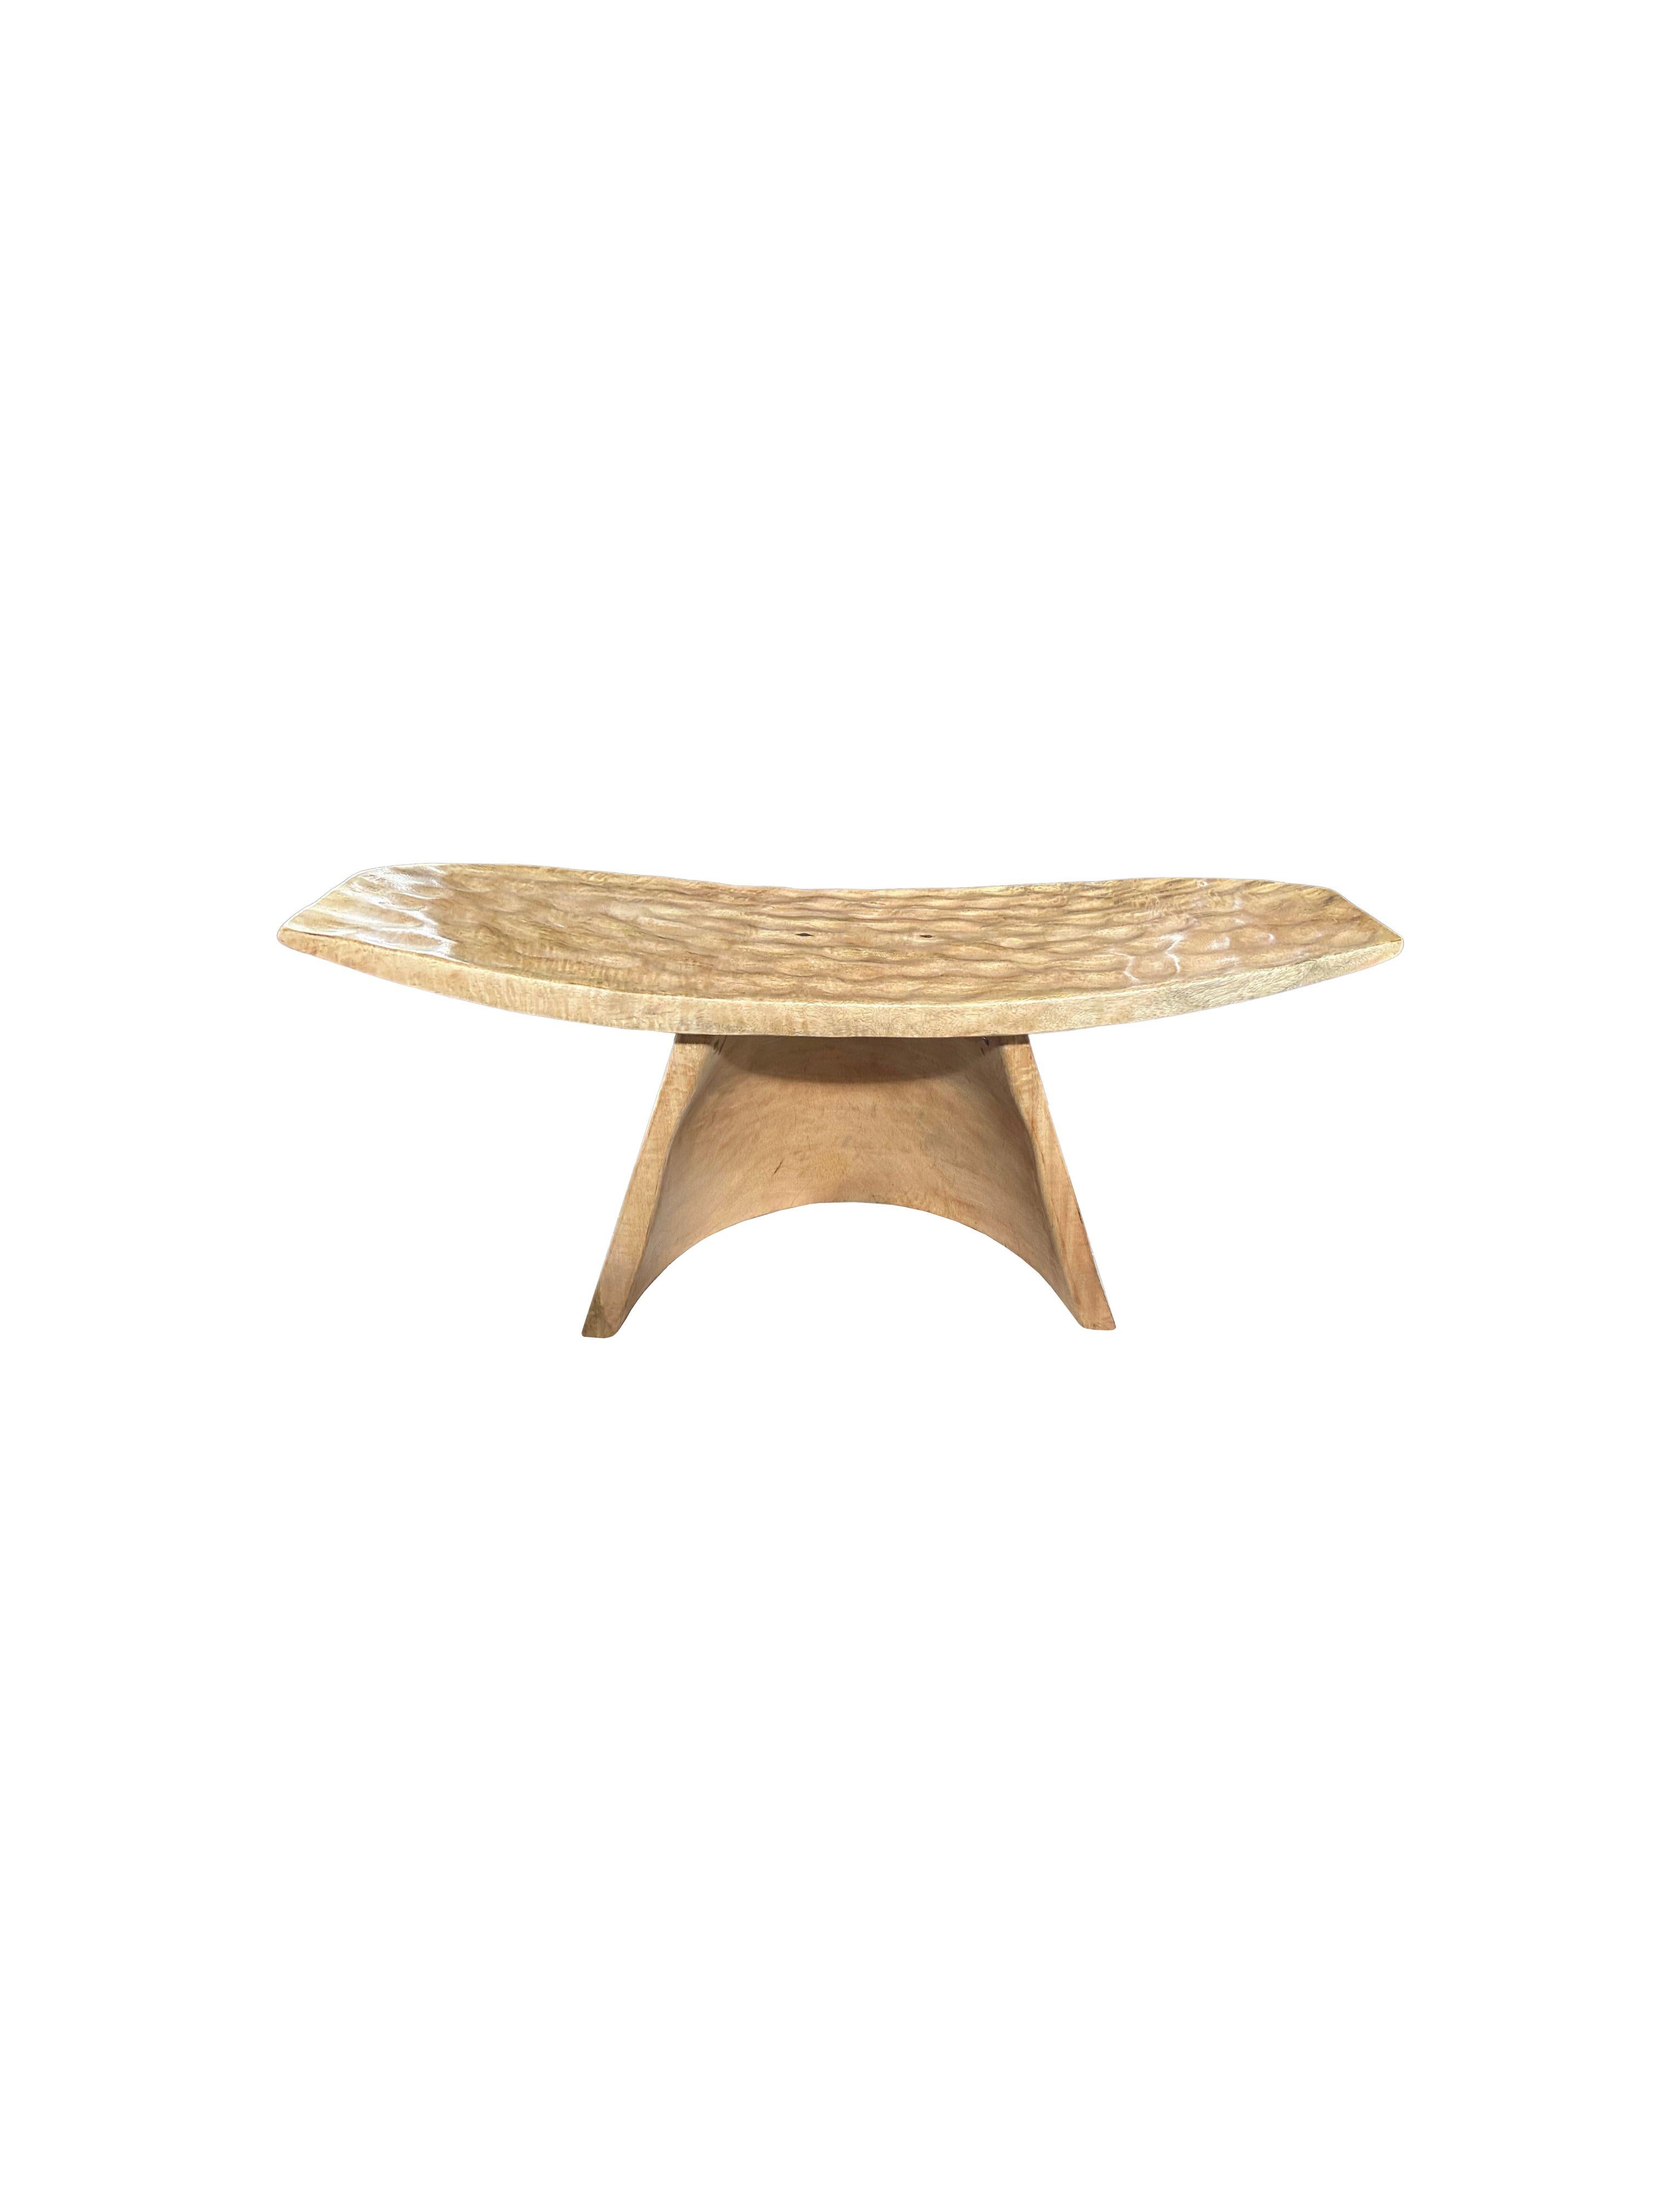 Sculptural Stool with Curved Seat & Hand Hewn Detailing, Natural Finish In Good Condition For Sale In Jimbaran, Bali